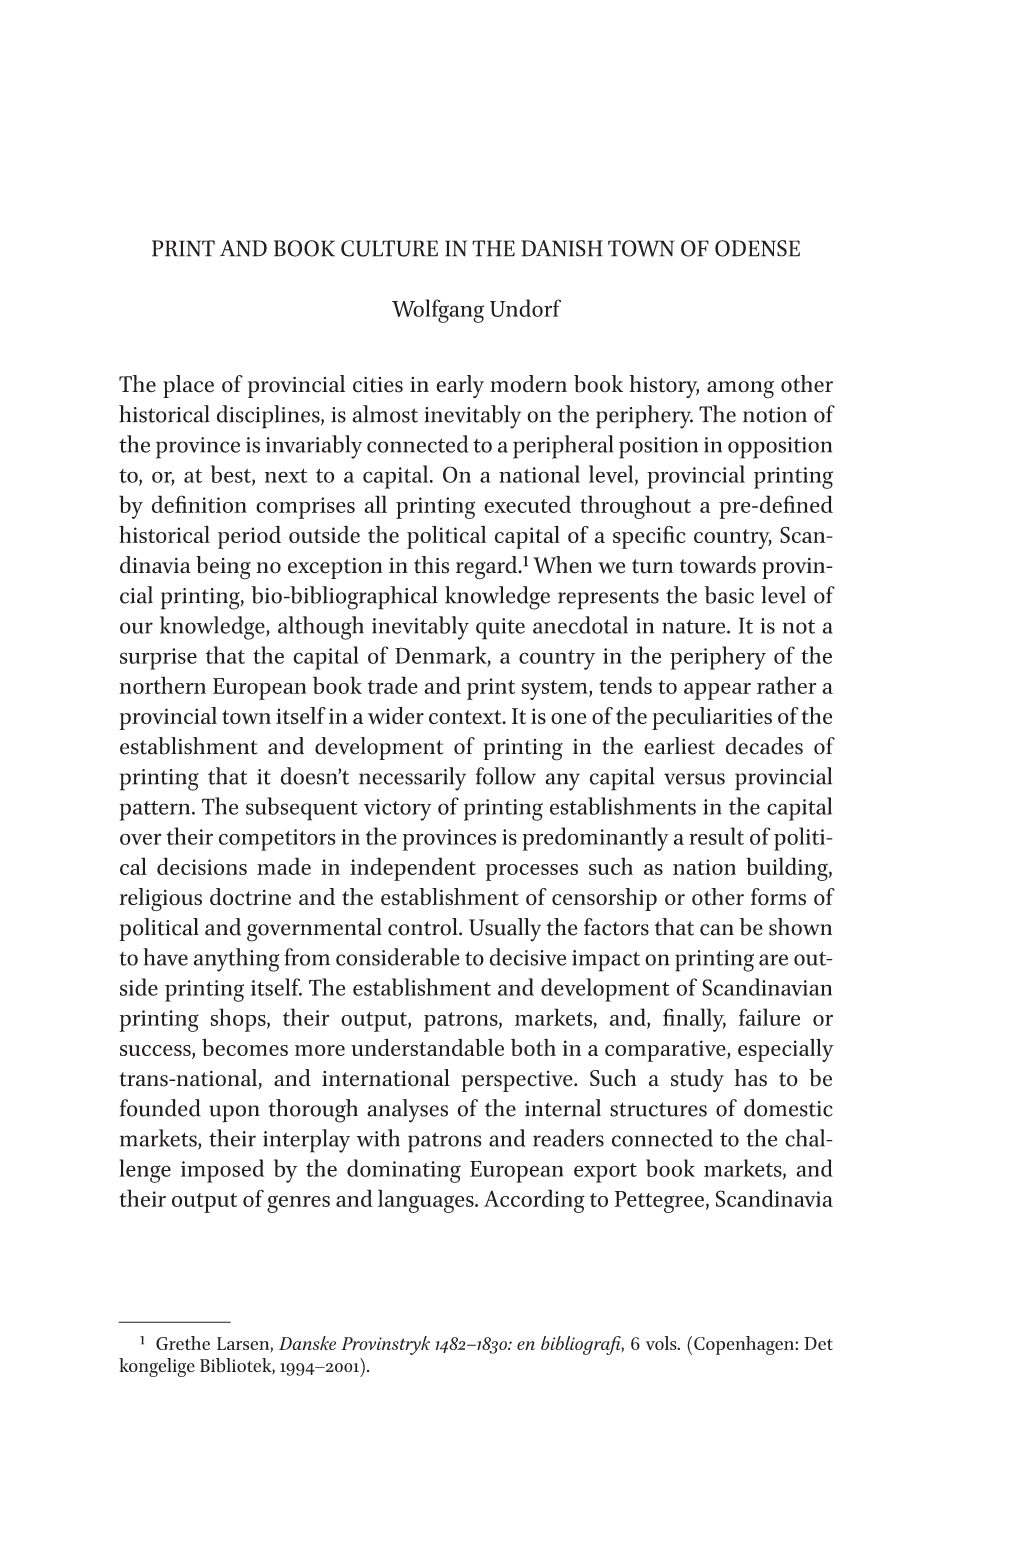 PRINT and BOOK CULTURE in the DANISH TOWN of ODENSE Wolfgang Undorf the Place of Provincial Cities in Early Modern Book History